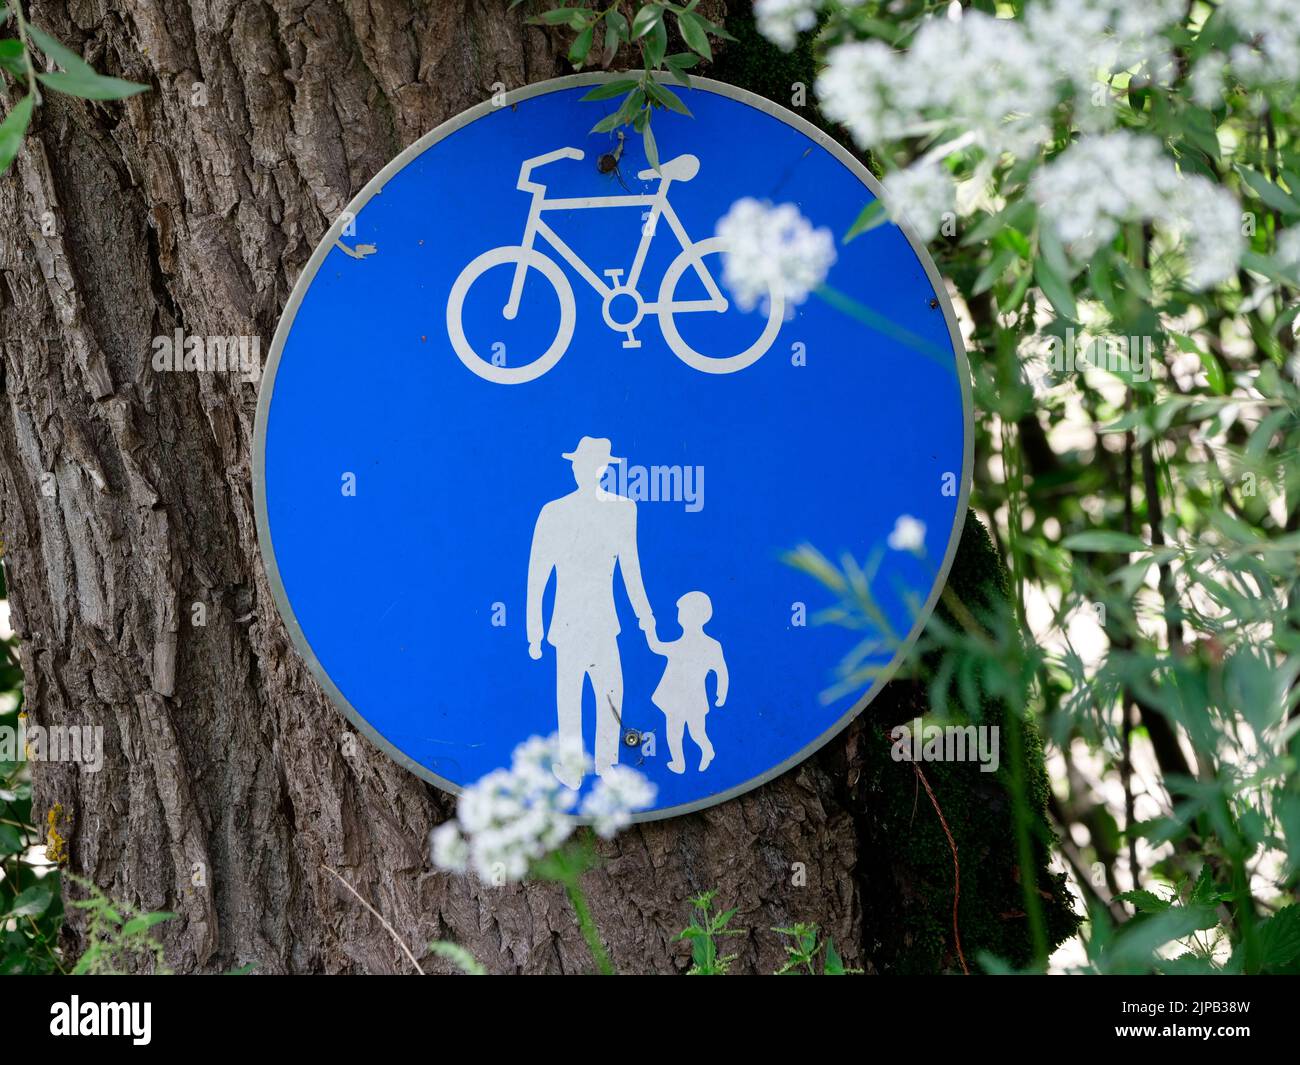 Man holding hands walking with child and cylcle path sign indicating foot and cycle path, Pruggern, Liezen, Styria, Austria Stock Photo